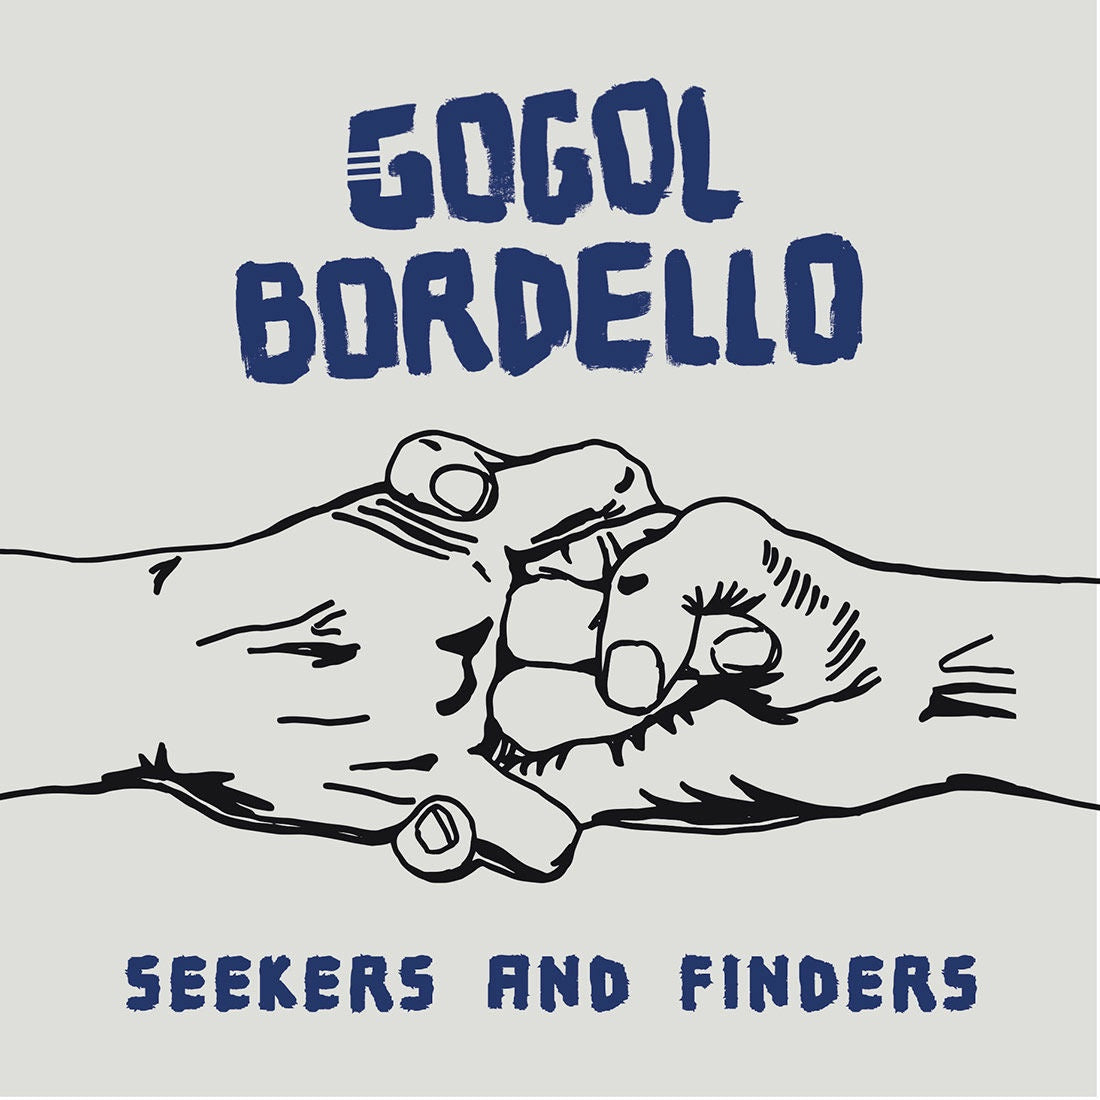 Gogol Bordello ‎– Seekers And Finders - New Lp Record 2017 Cooking France Import Indie Exclusive Blue & White Marble Vinyl - Punk